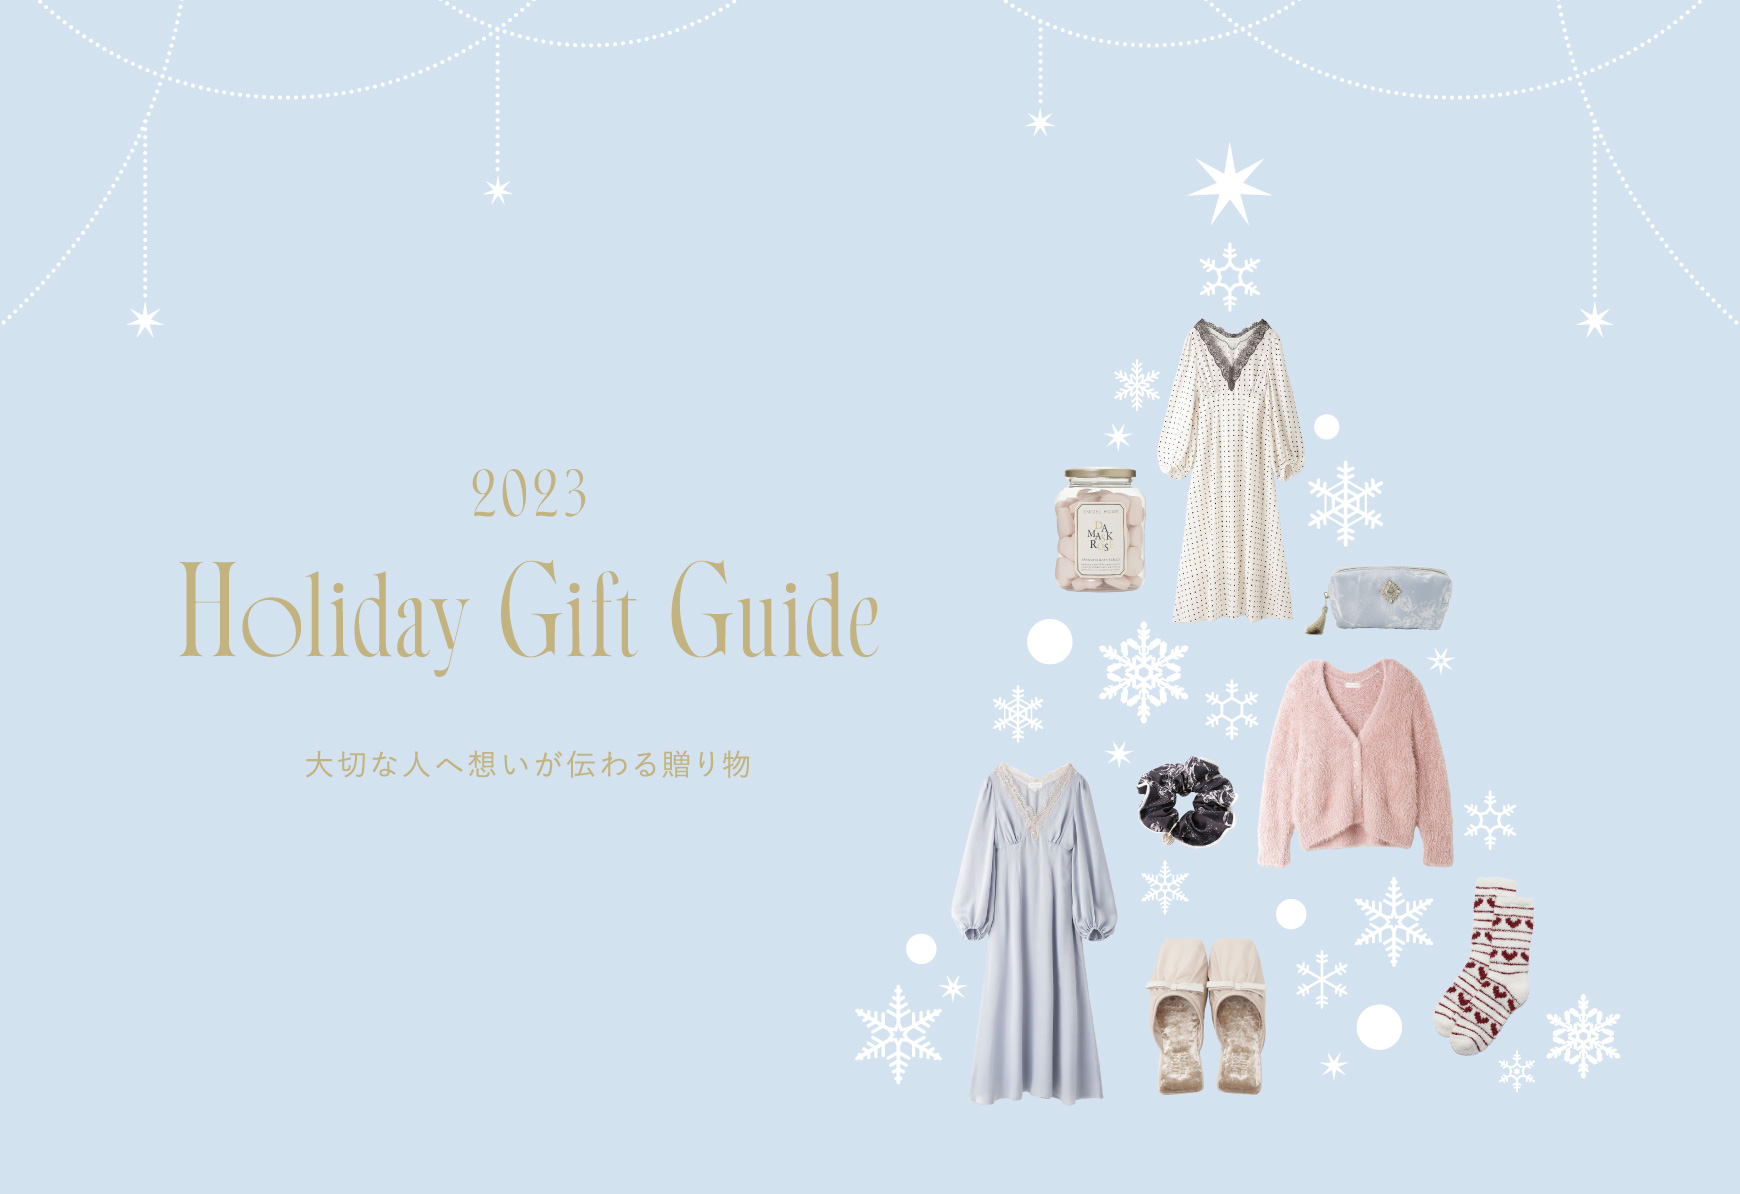 2023 Hliday Gift Guide 大切な人へ想いが伝わる贈り物